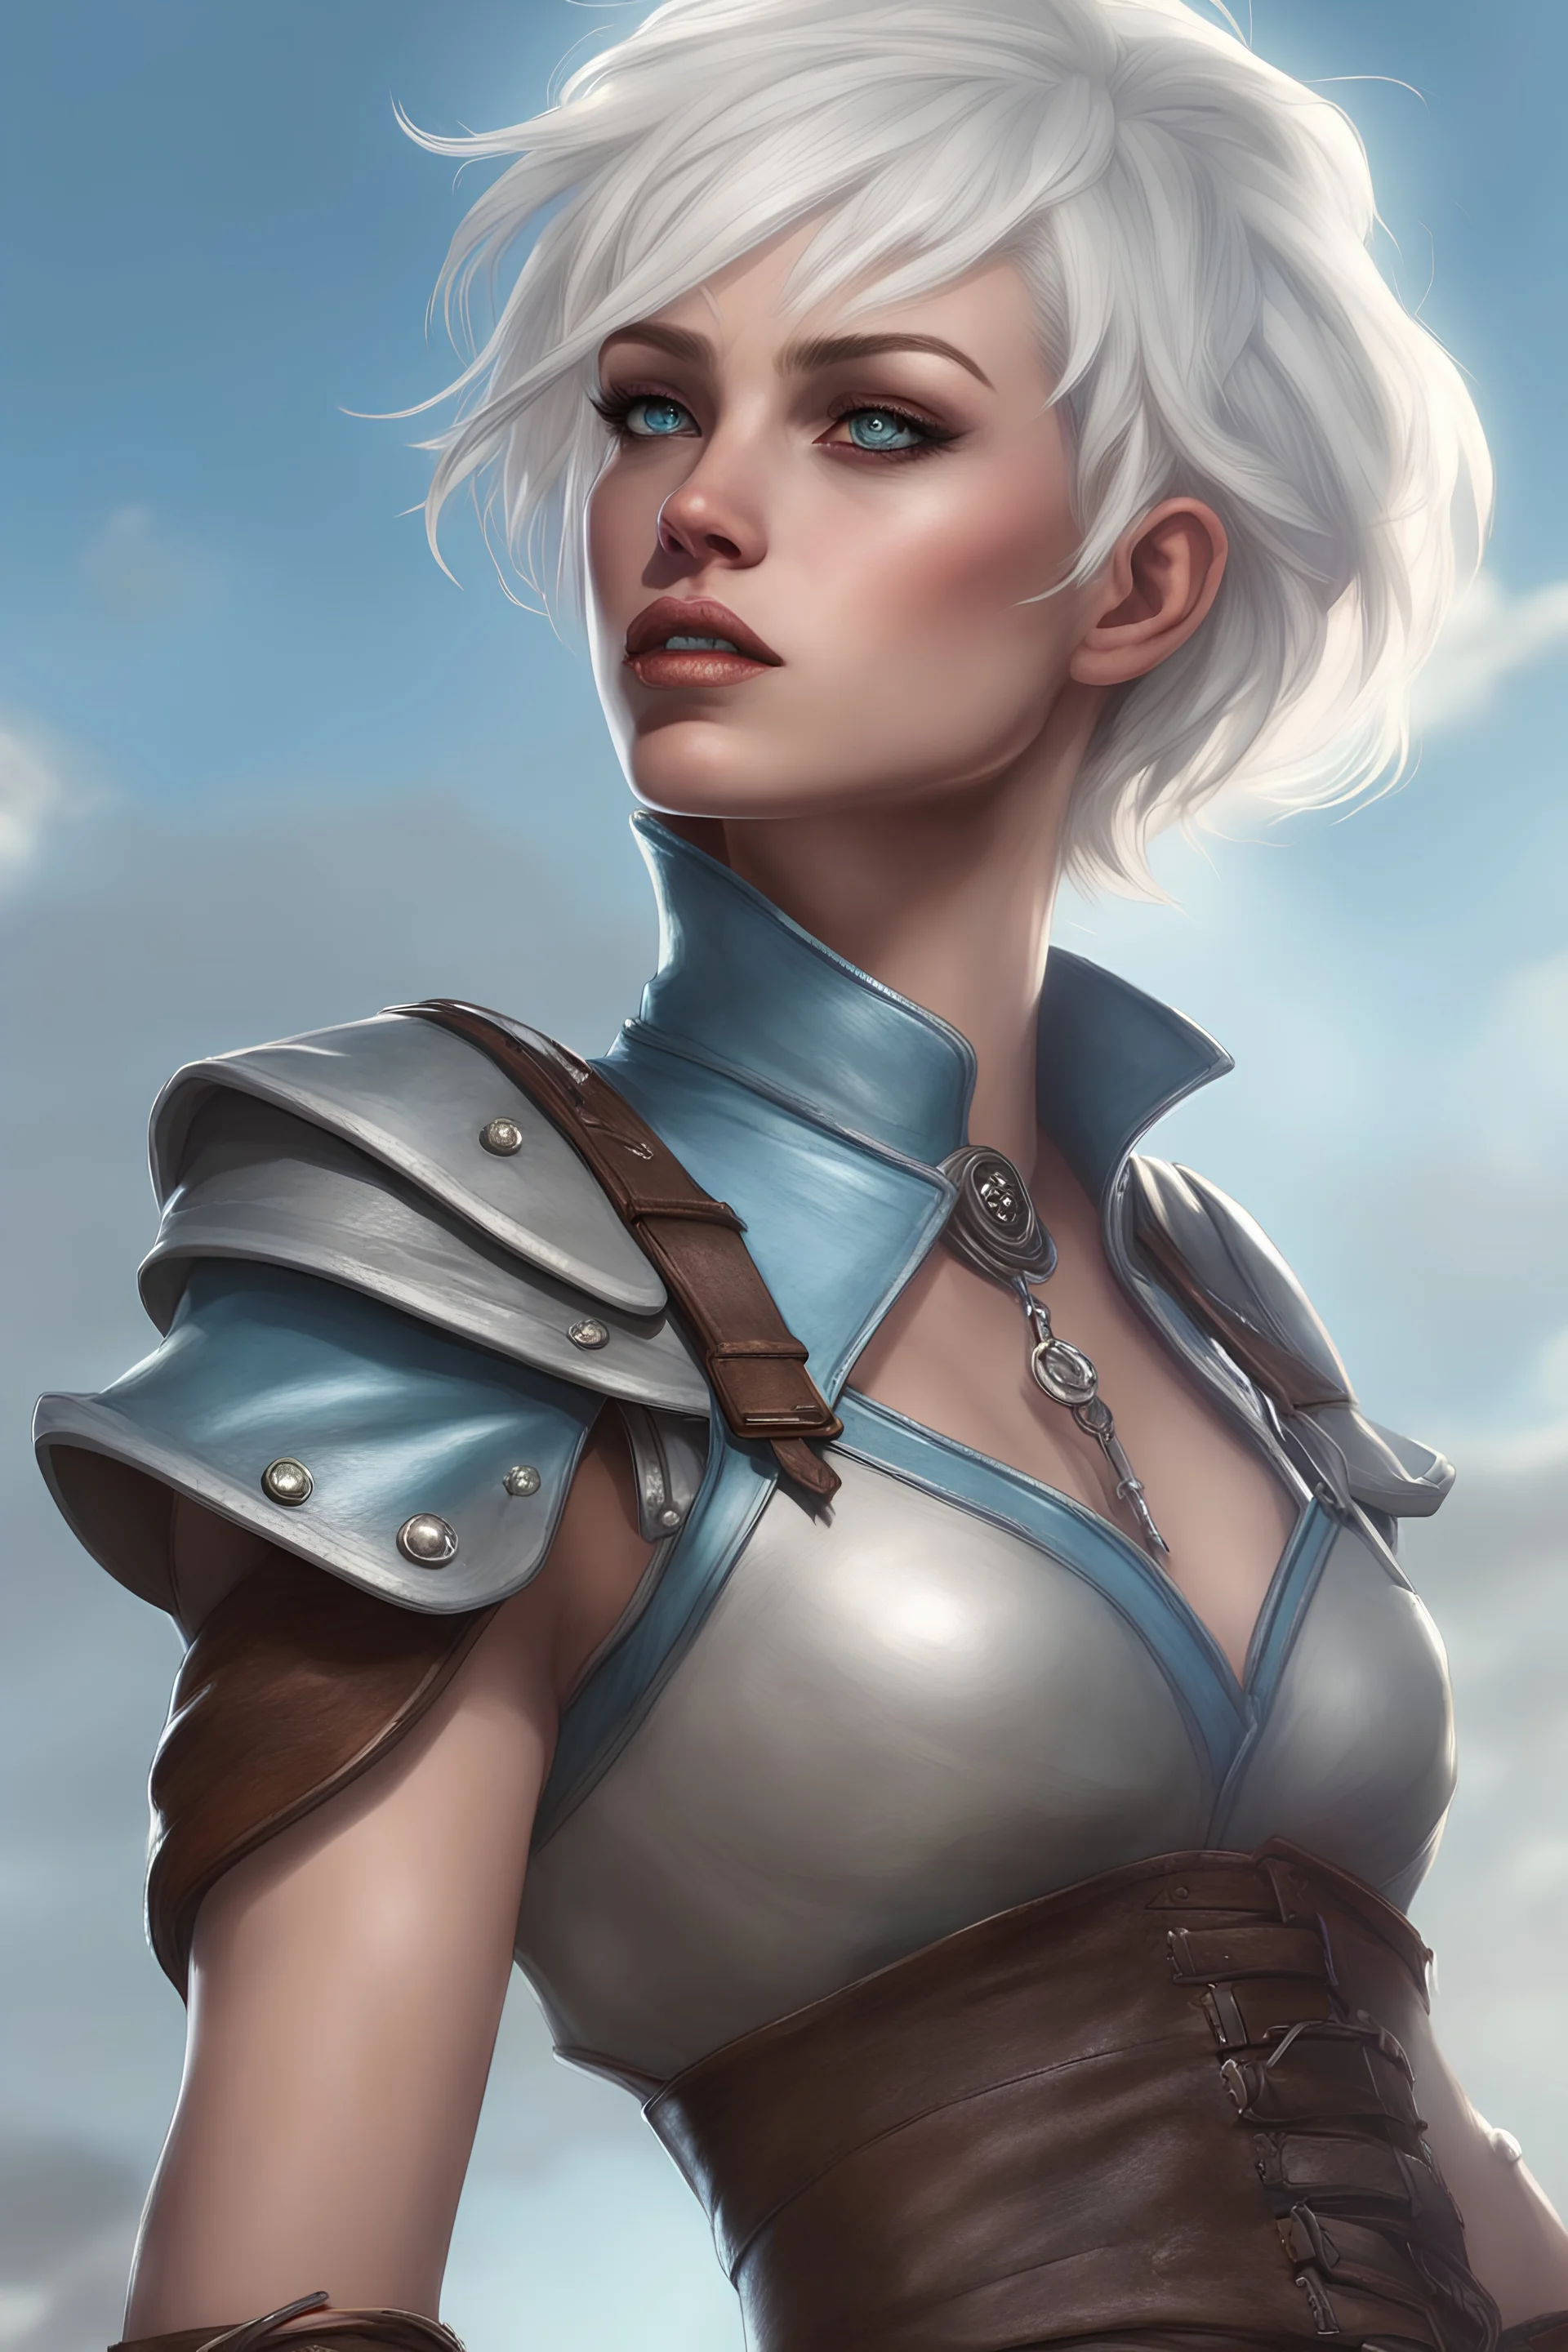 create a young female air genasi from dungeons and dragons, white short hair, undercut, light blue eyes, wind like hair, wearing hot leather clothing that also looks studded, she is smoking, realistic, digital art, high resolution, strong lighting